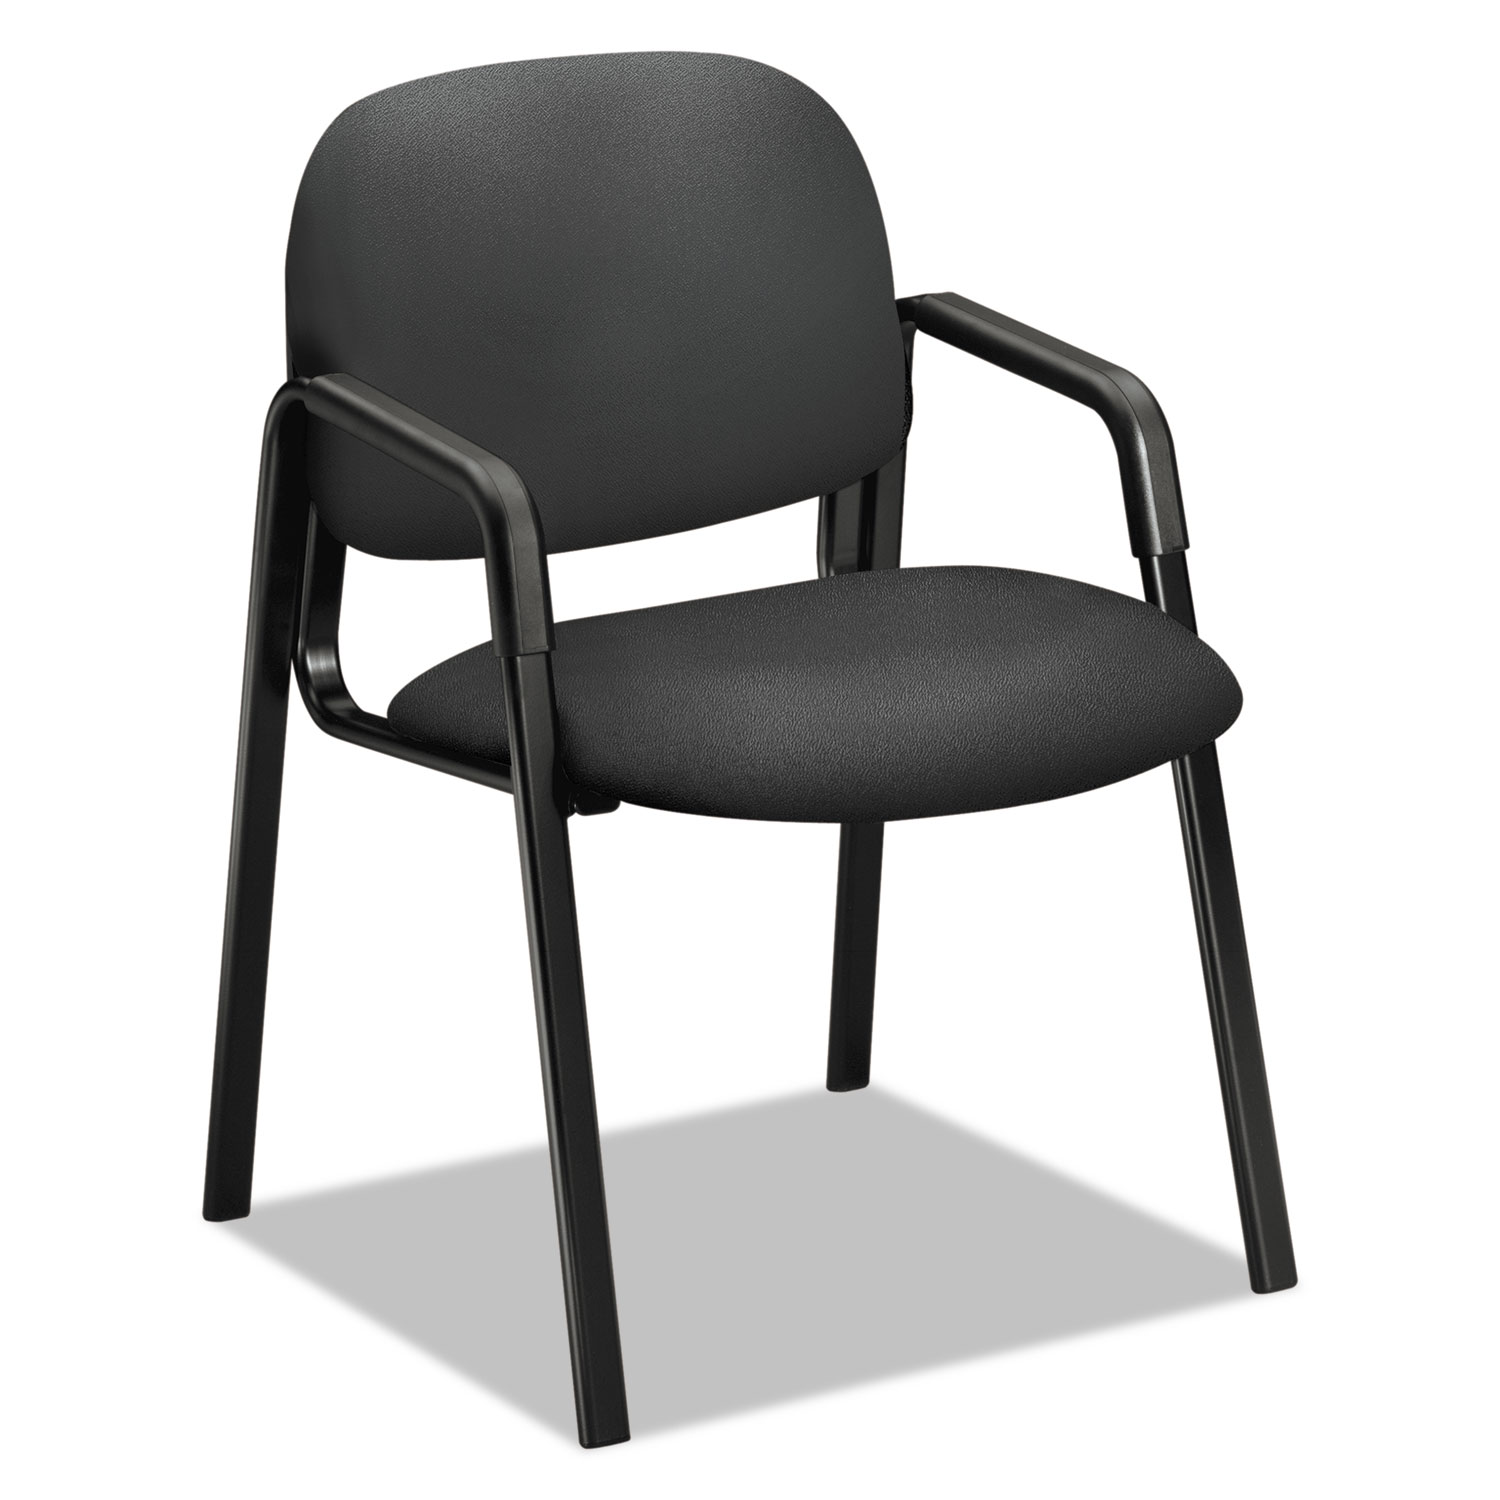 Solutions Seating 4000 Series Leg Base Guest Chair, Iron Ore